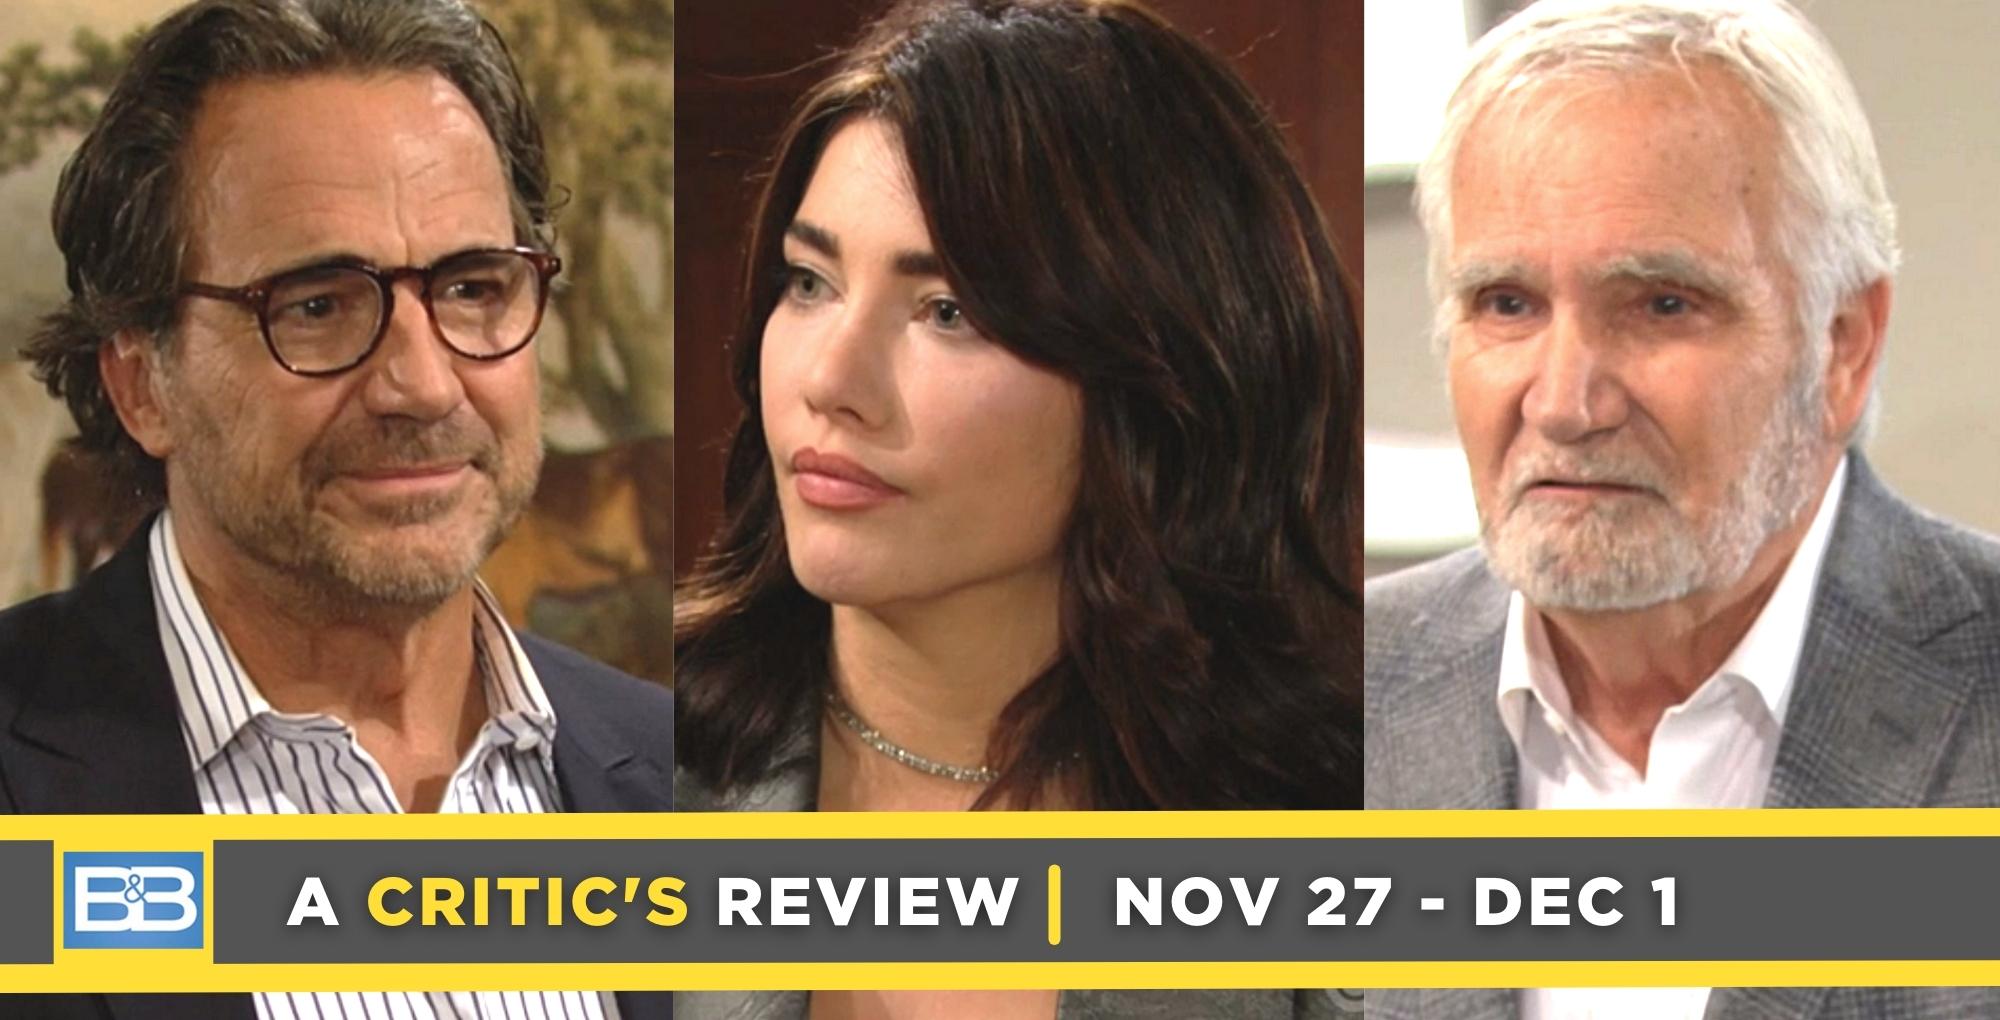 the bold and the beautiful critic's review for november 27 – december 1, 2023, three images, ridge, steffy, and eric.